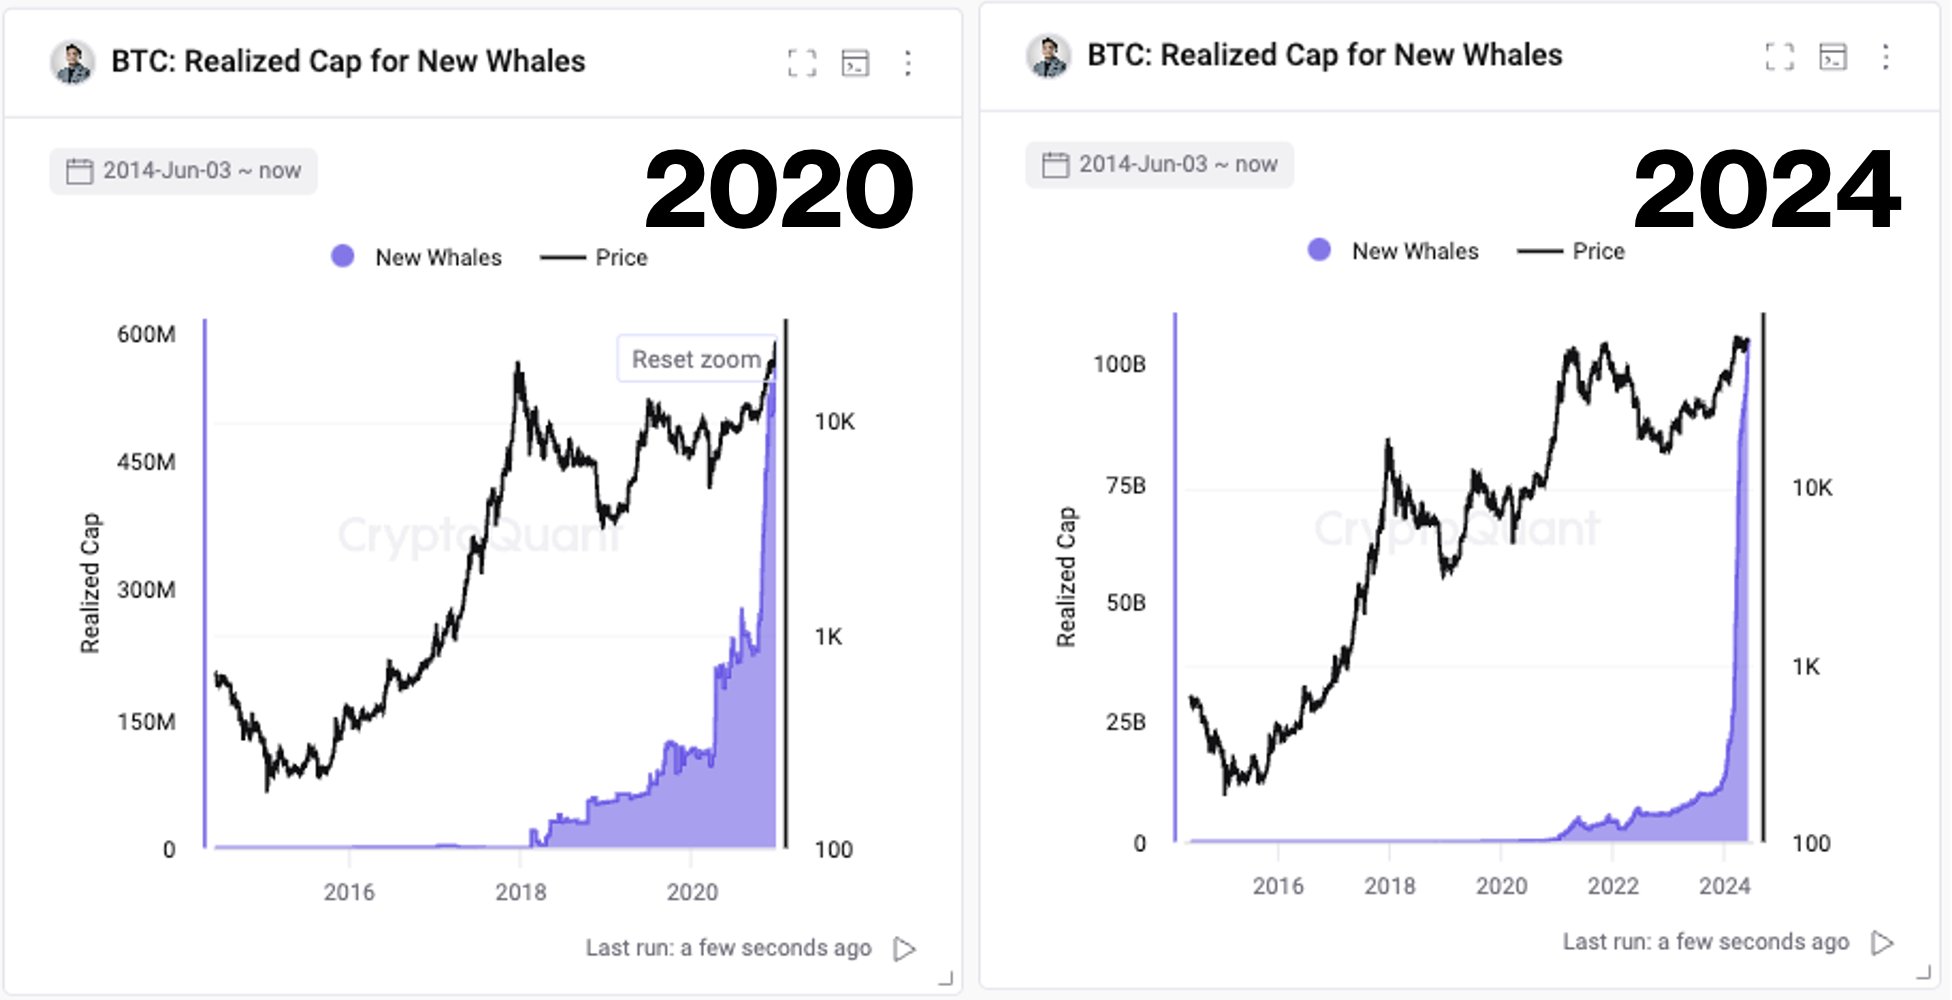 Bitcoin realized cap by whales